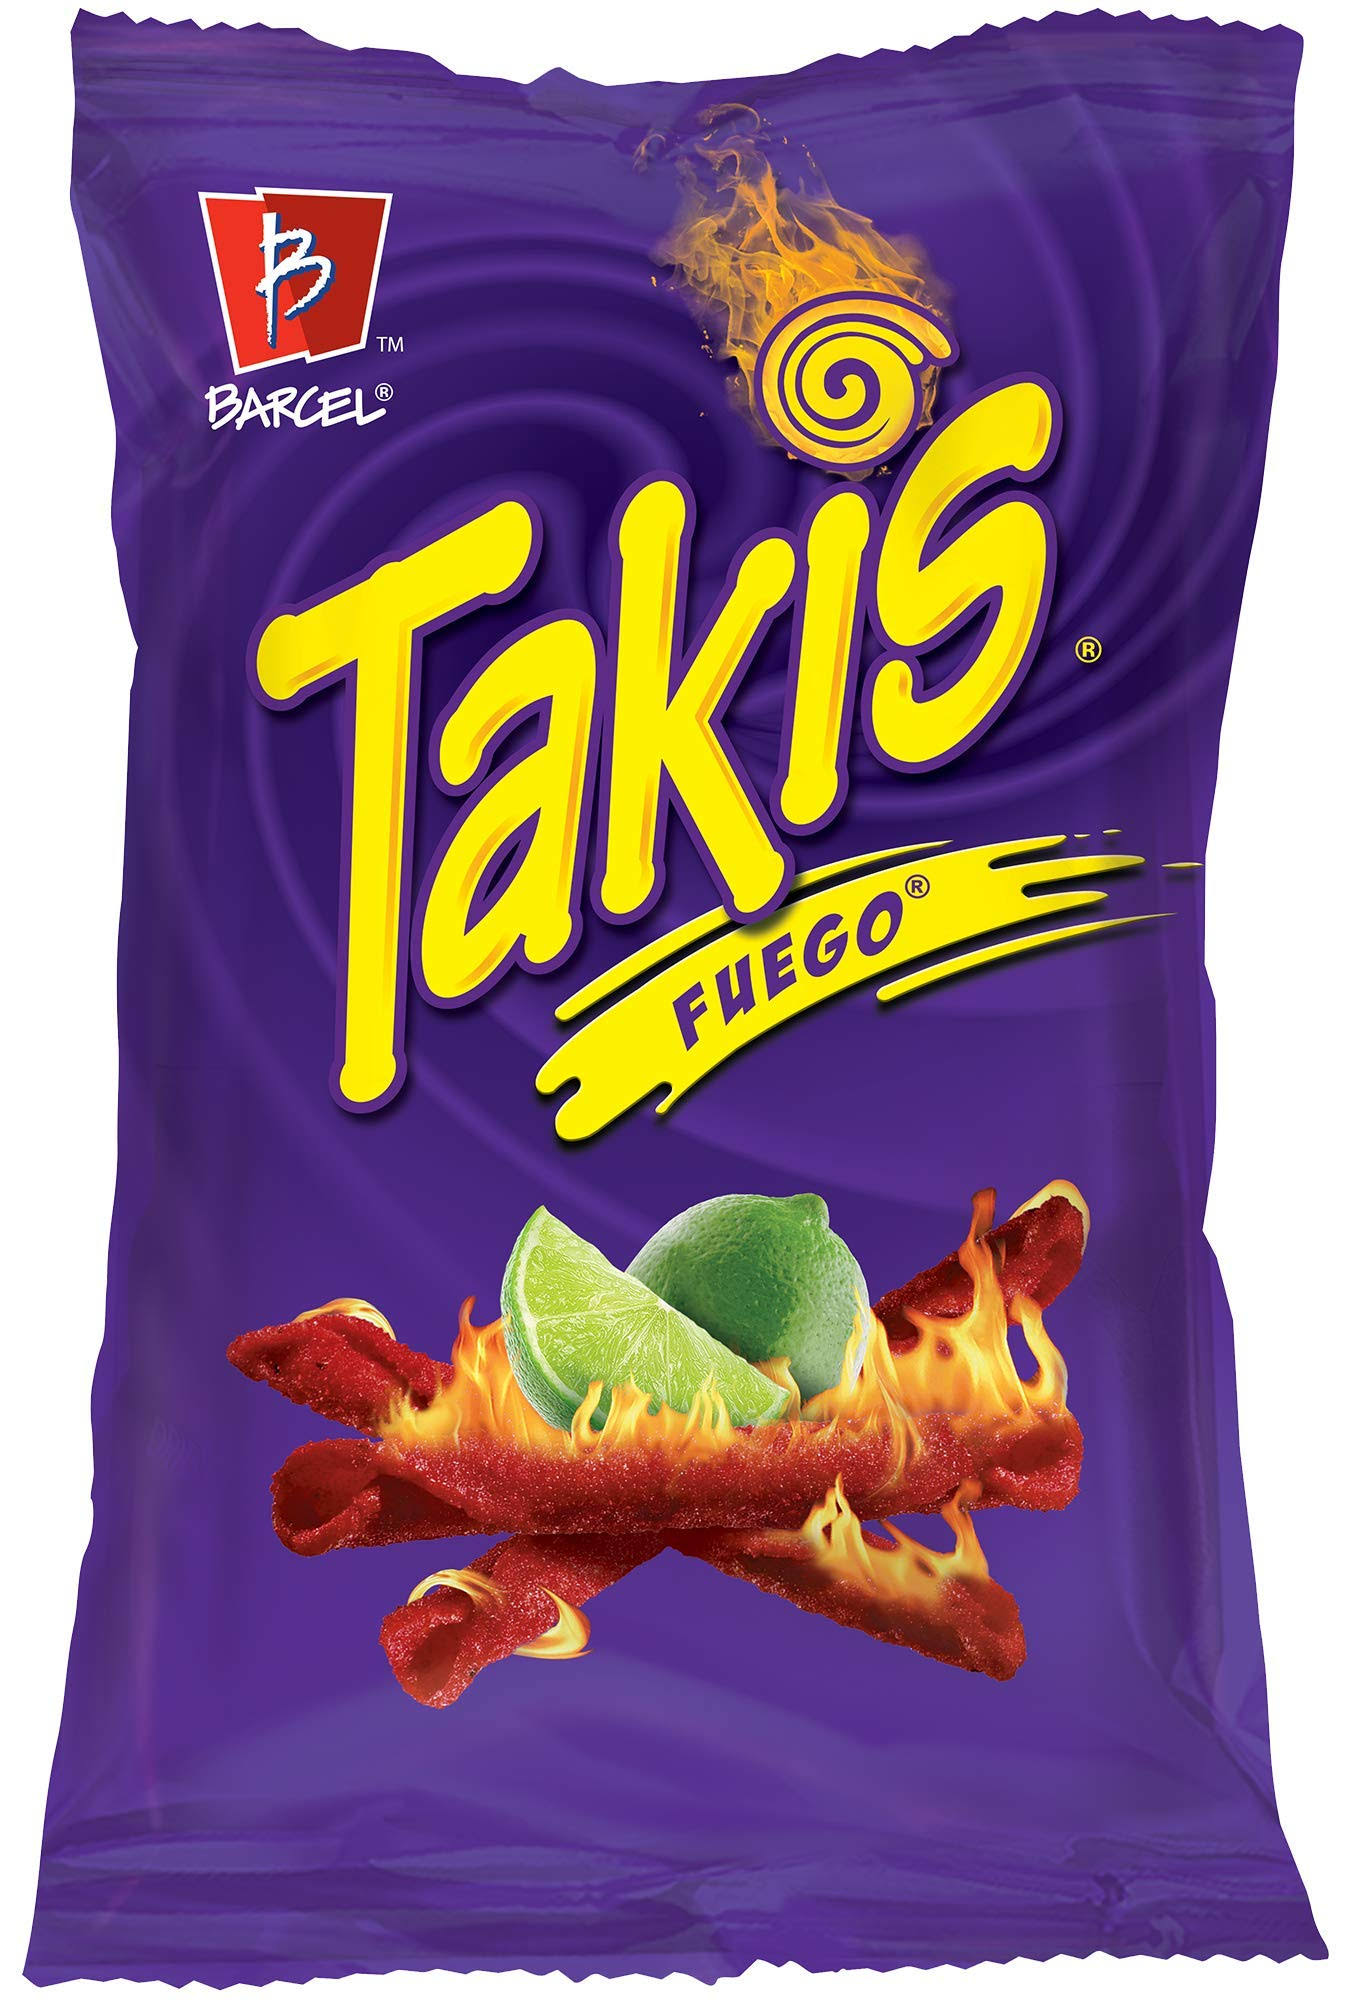 Barcel Takis Fuego Rolled Tortilla Chips - Hot Chili Pepper and Lime, 9.9oz